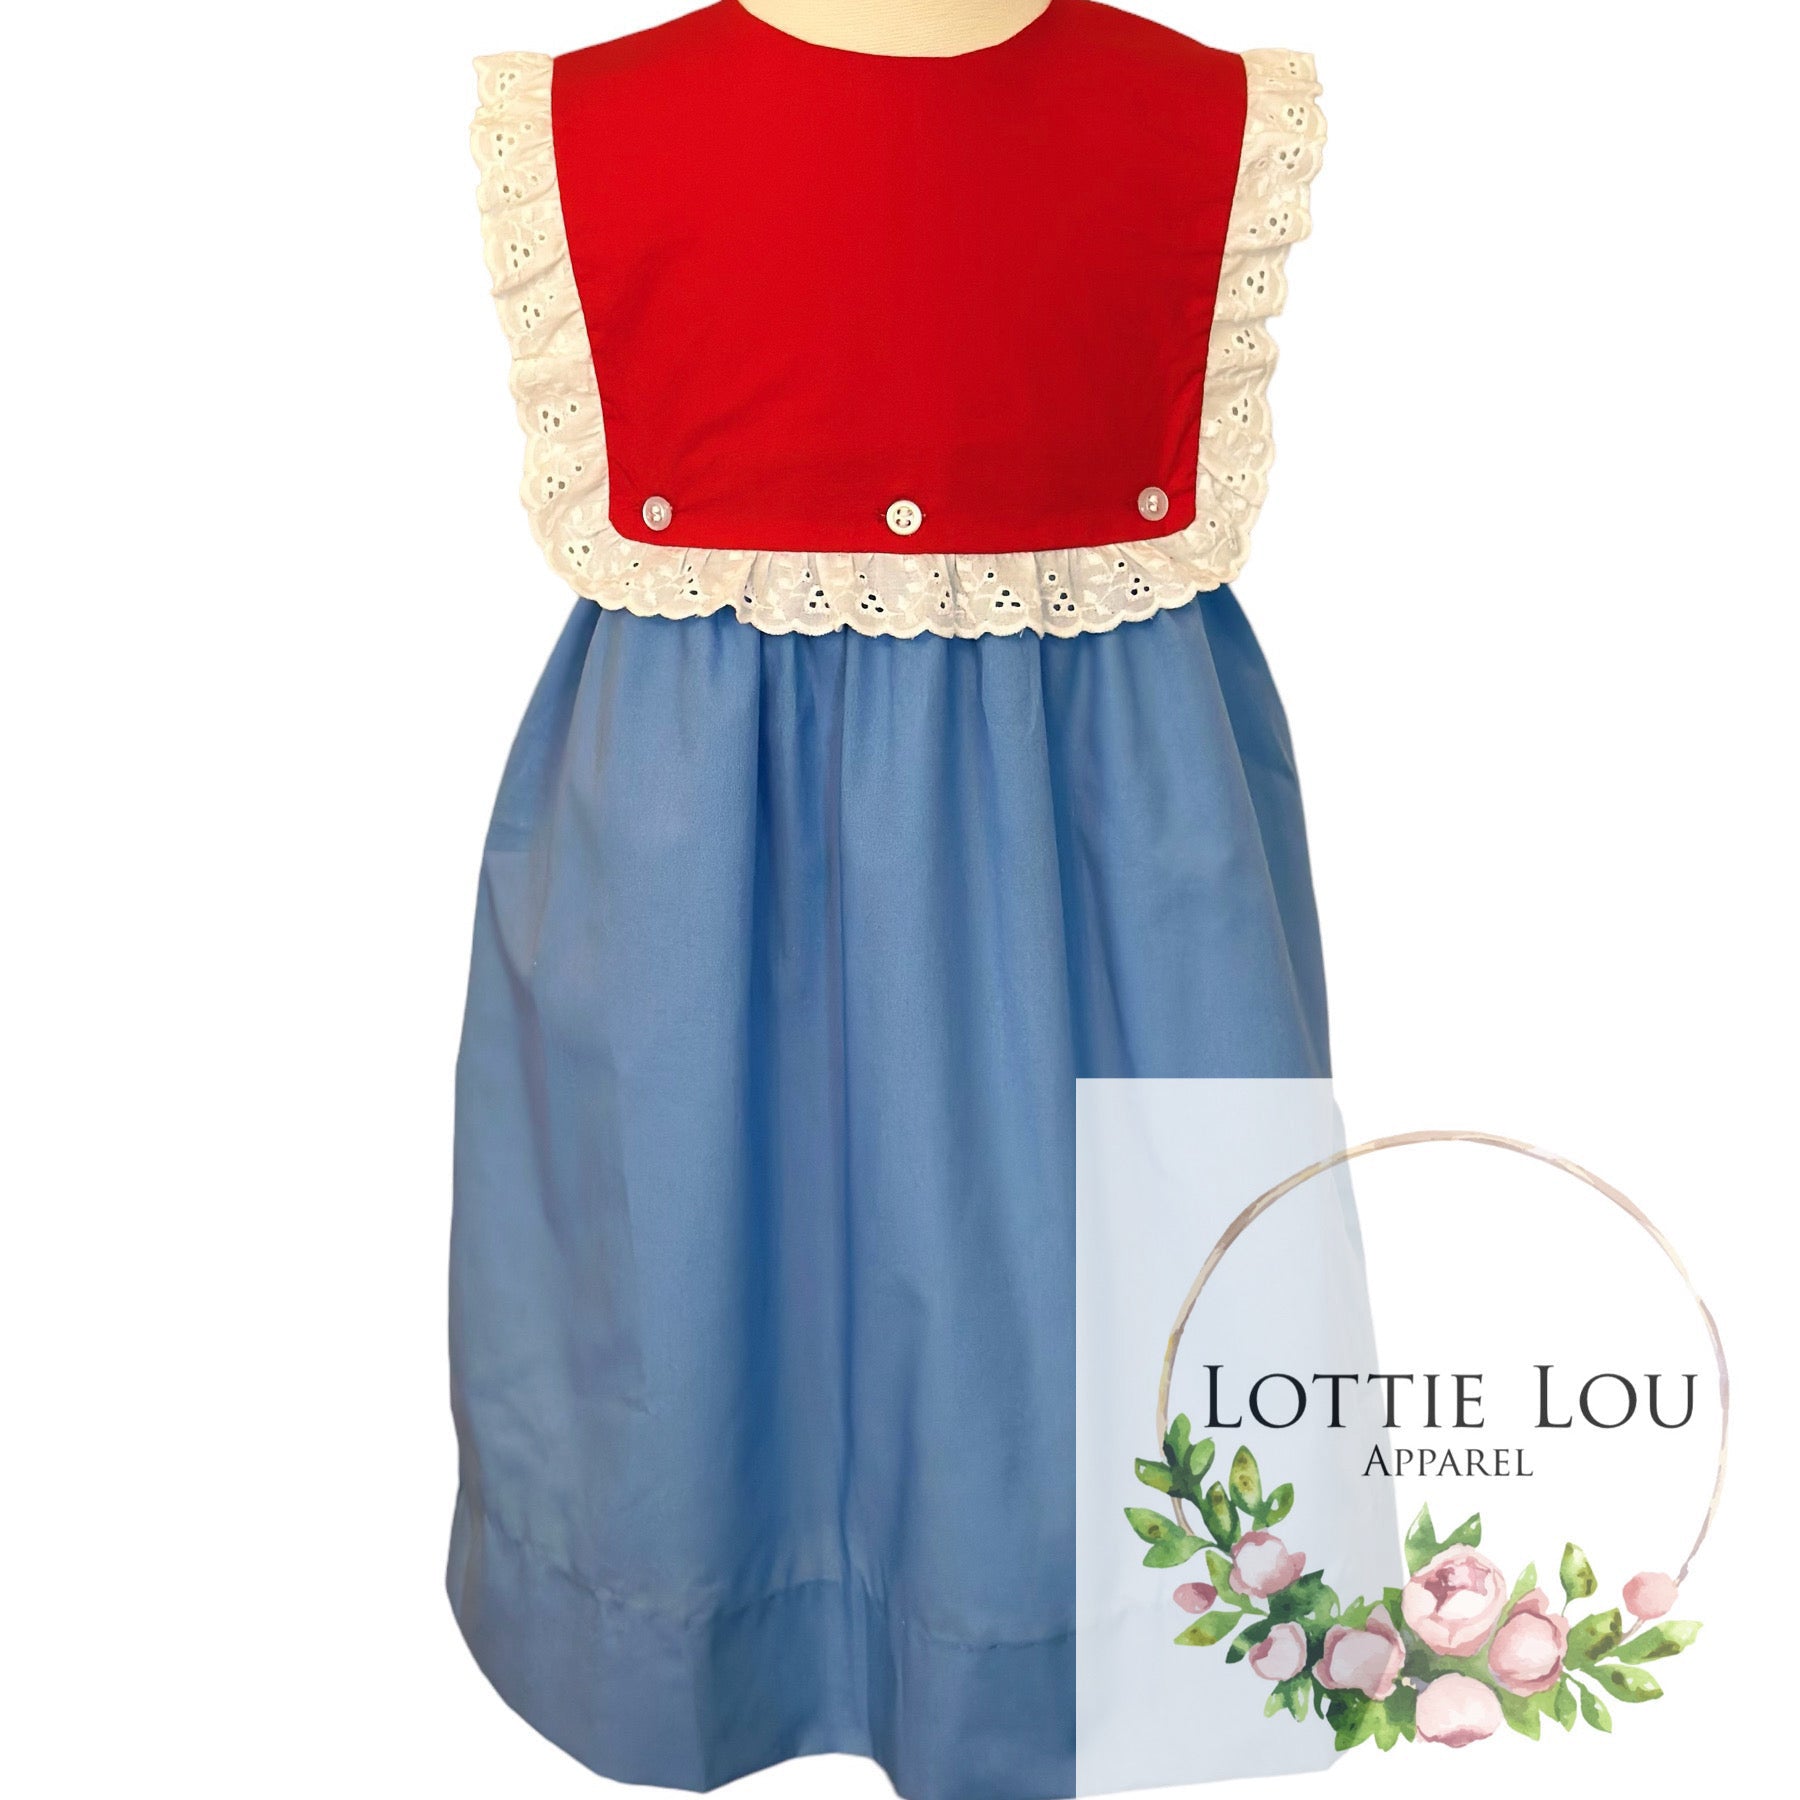 Claire Dress - Red, White, and Blue with Lace Trim – Lottie Lou